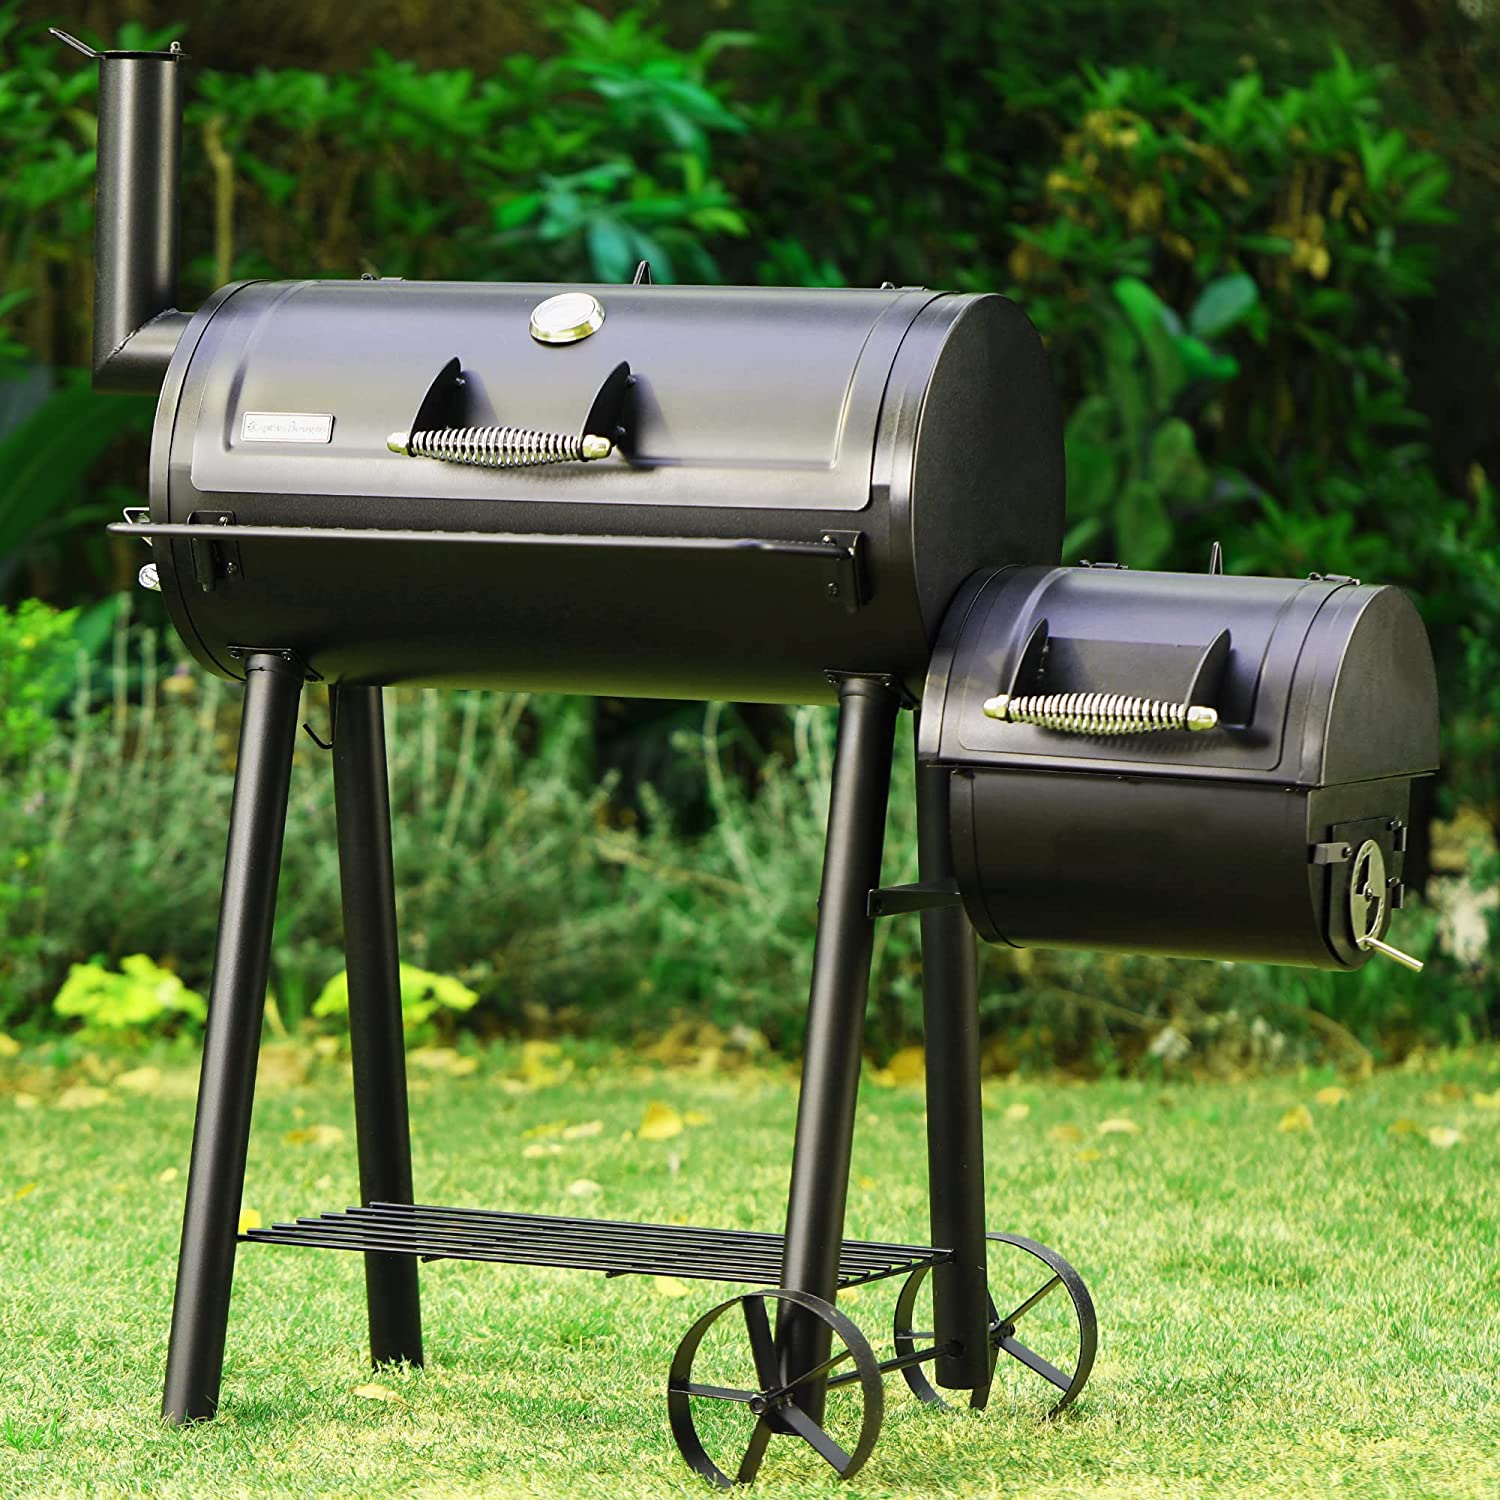 Captiva Designs Charcoal Grill with Offset Smoker